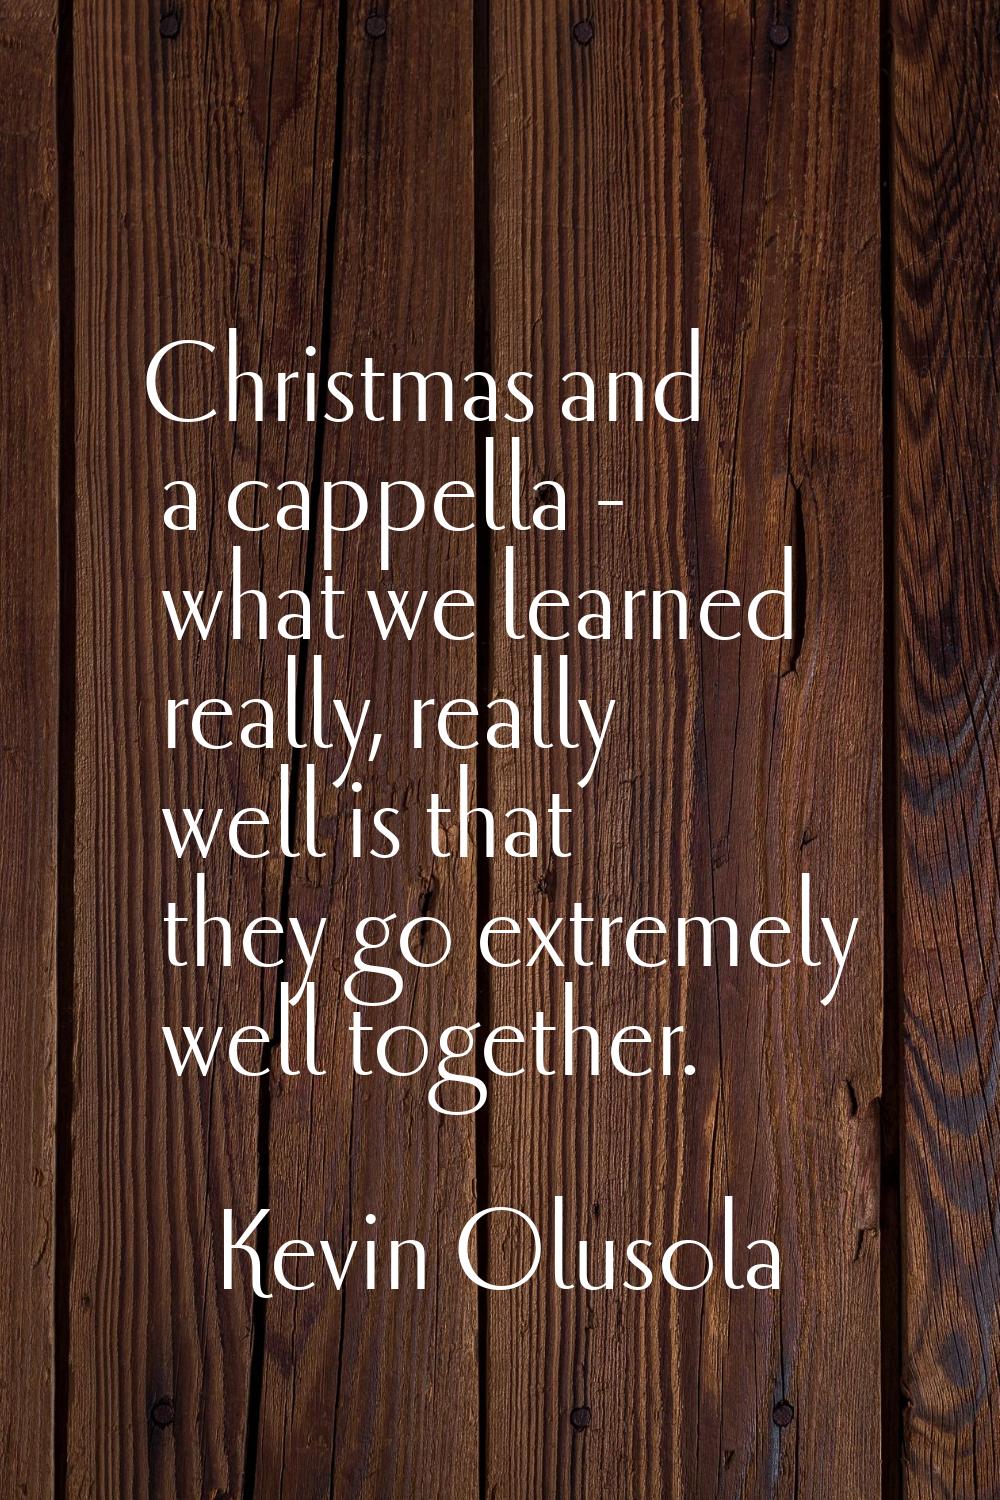 Christmas and a cappella - what we learned really, really well is that they go extremely well toget